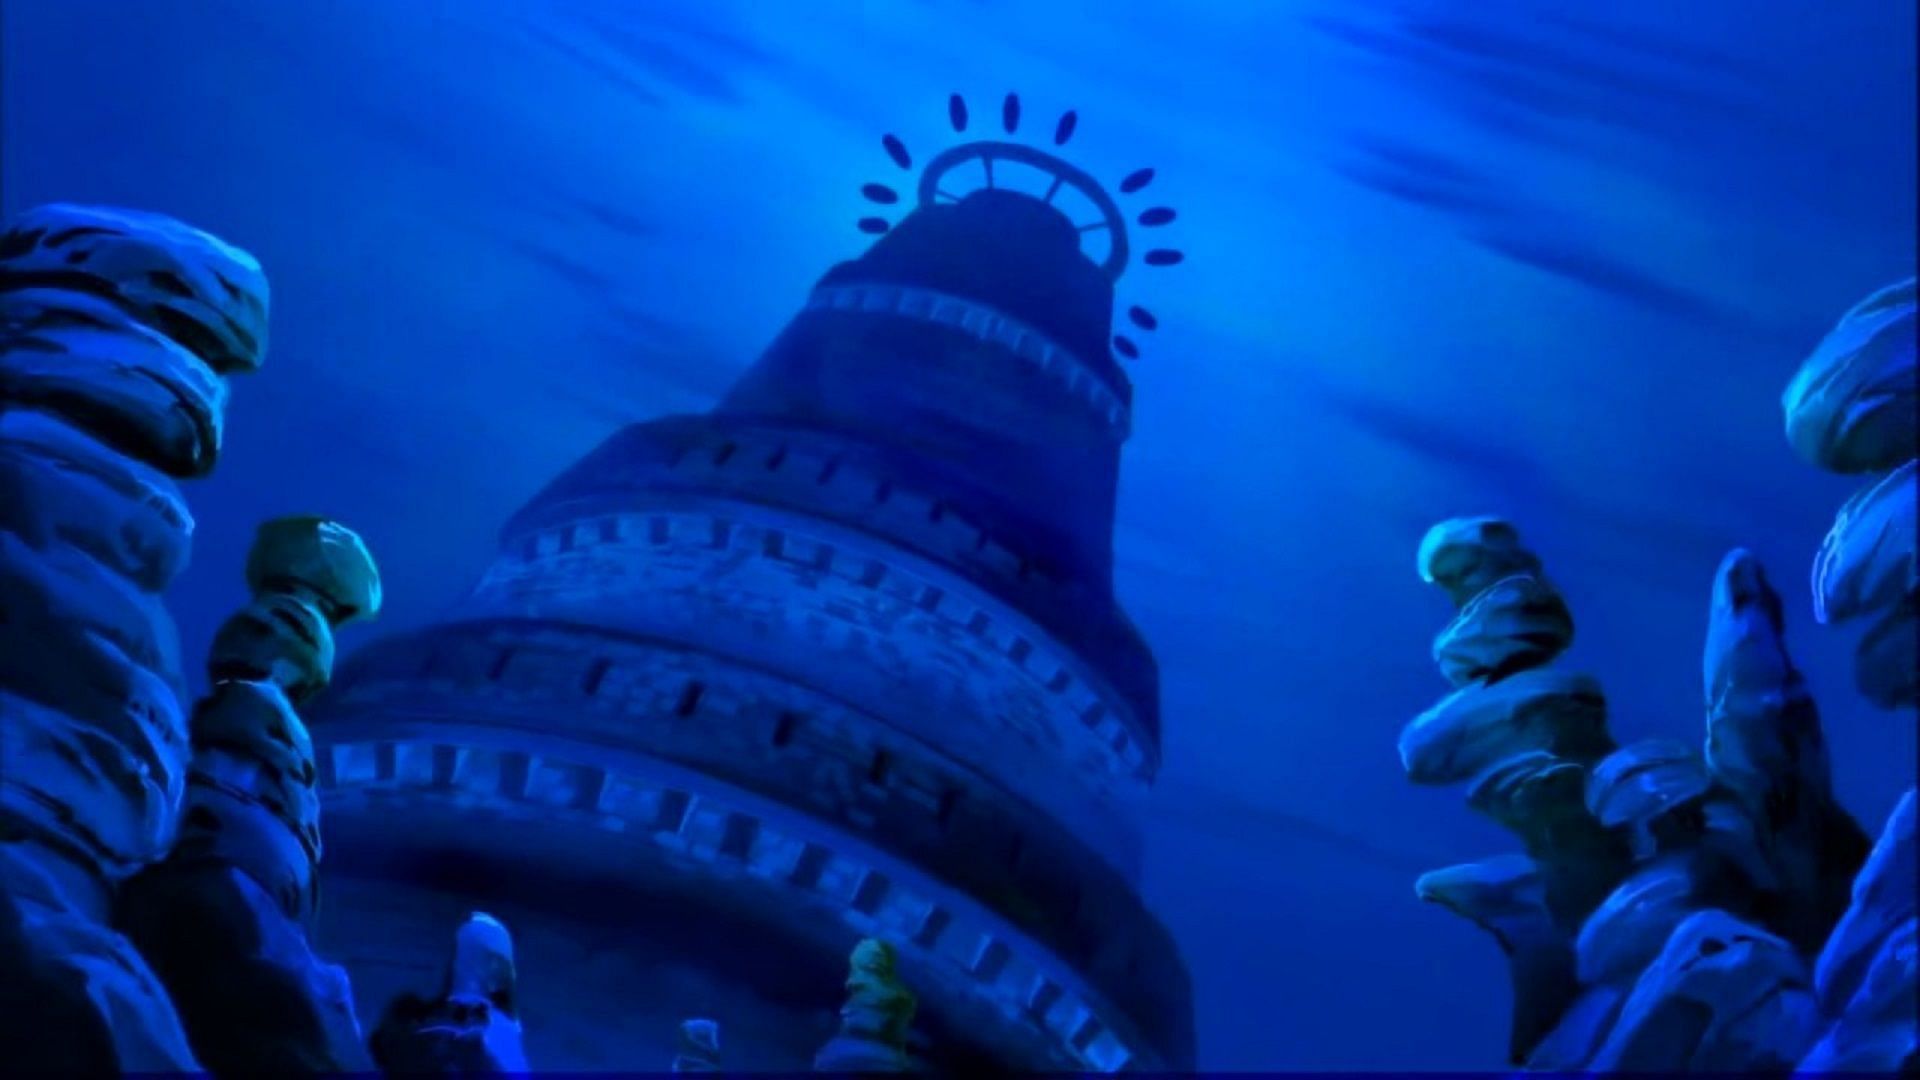 Impel Down as seen in the One Piece anime (Image via Toei Animation, One Piece)